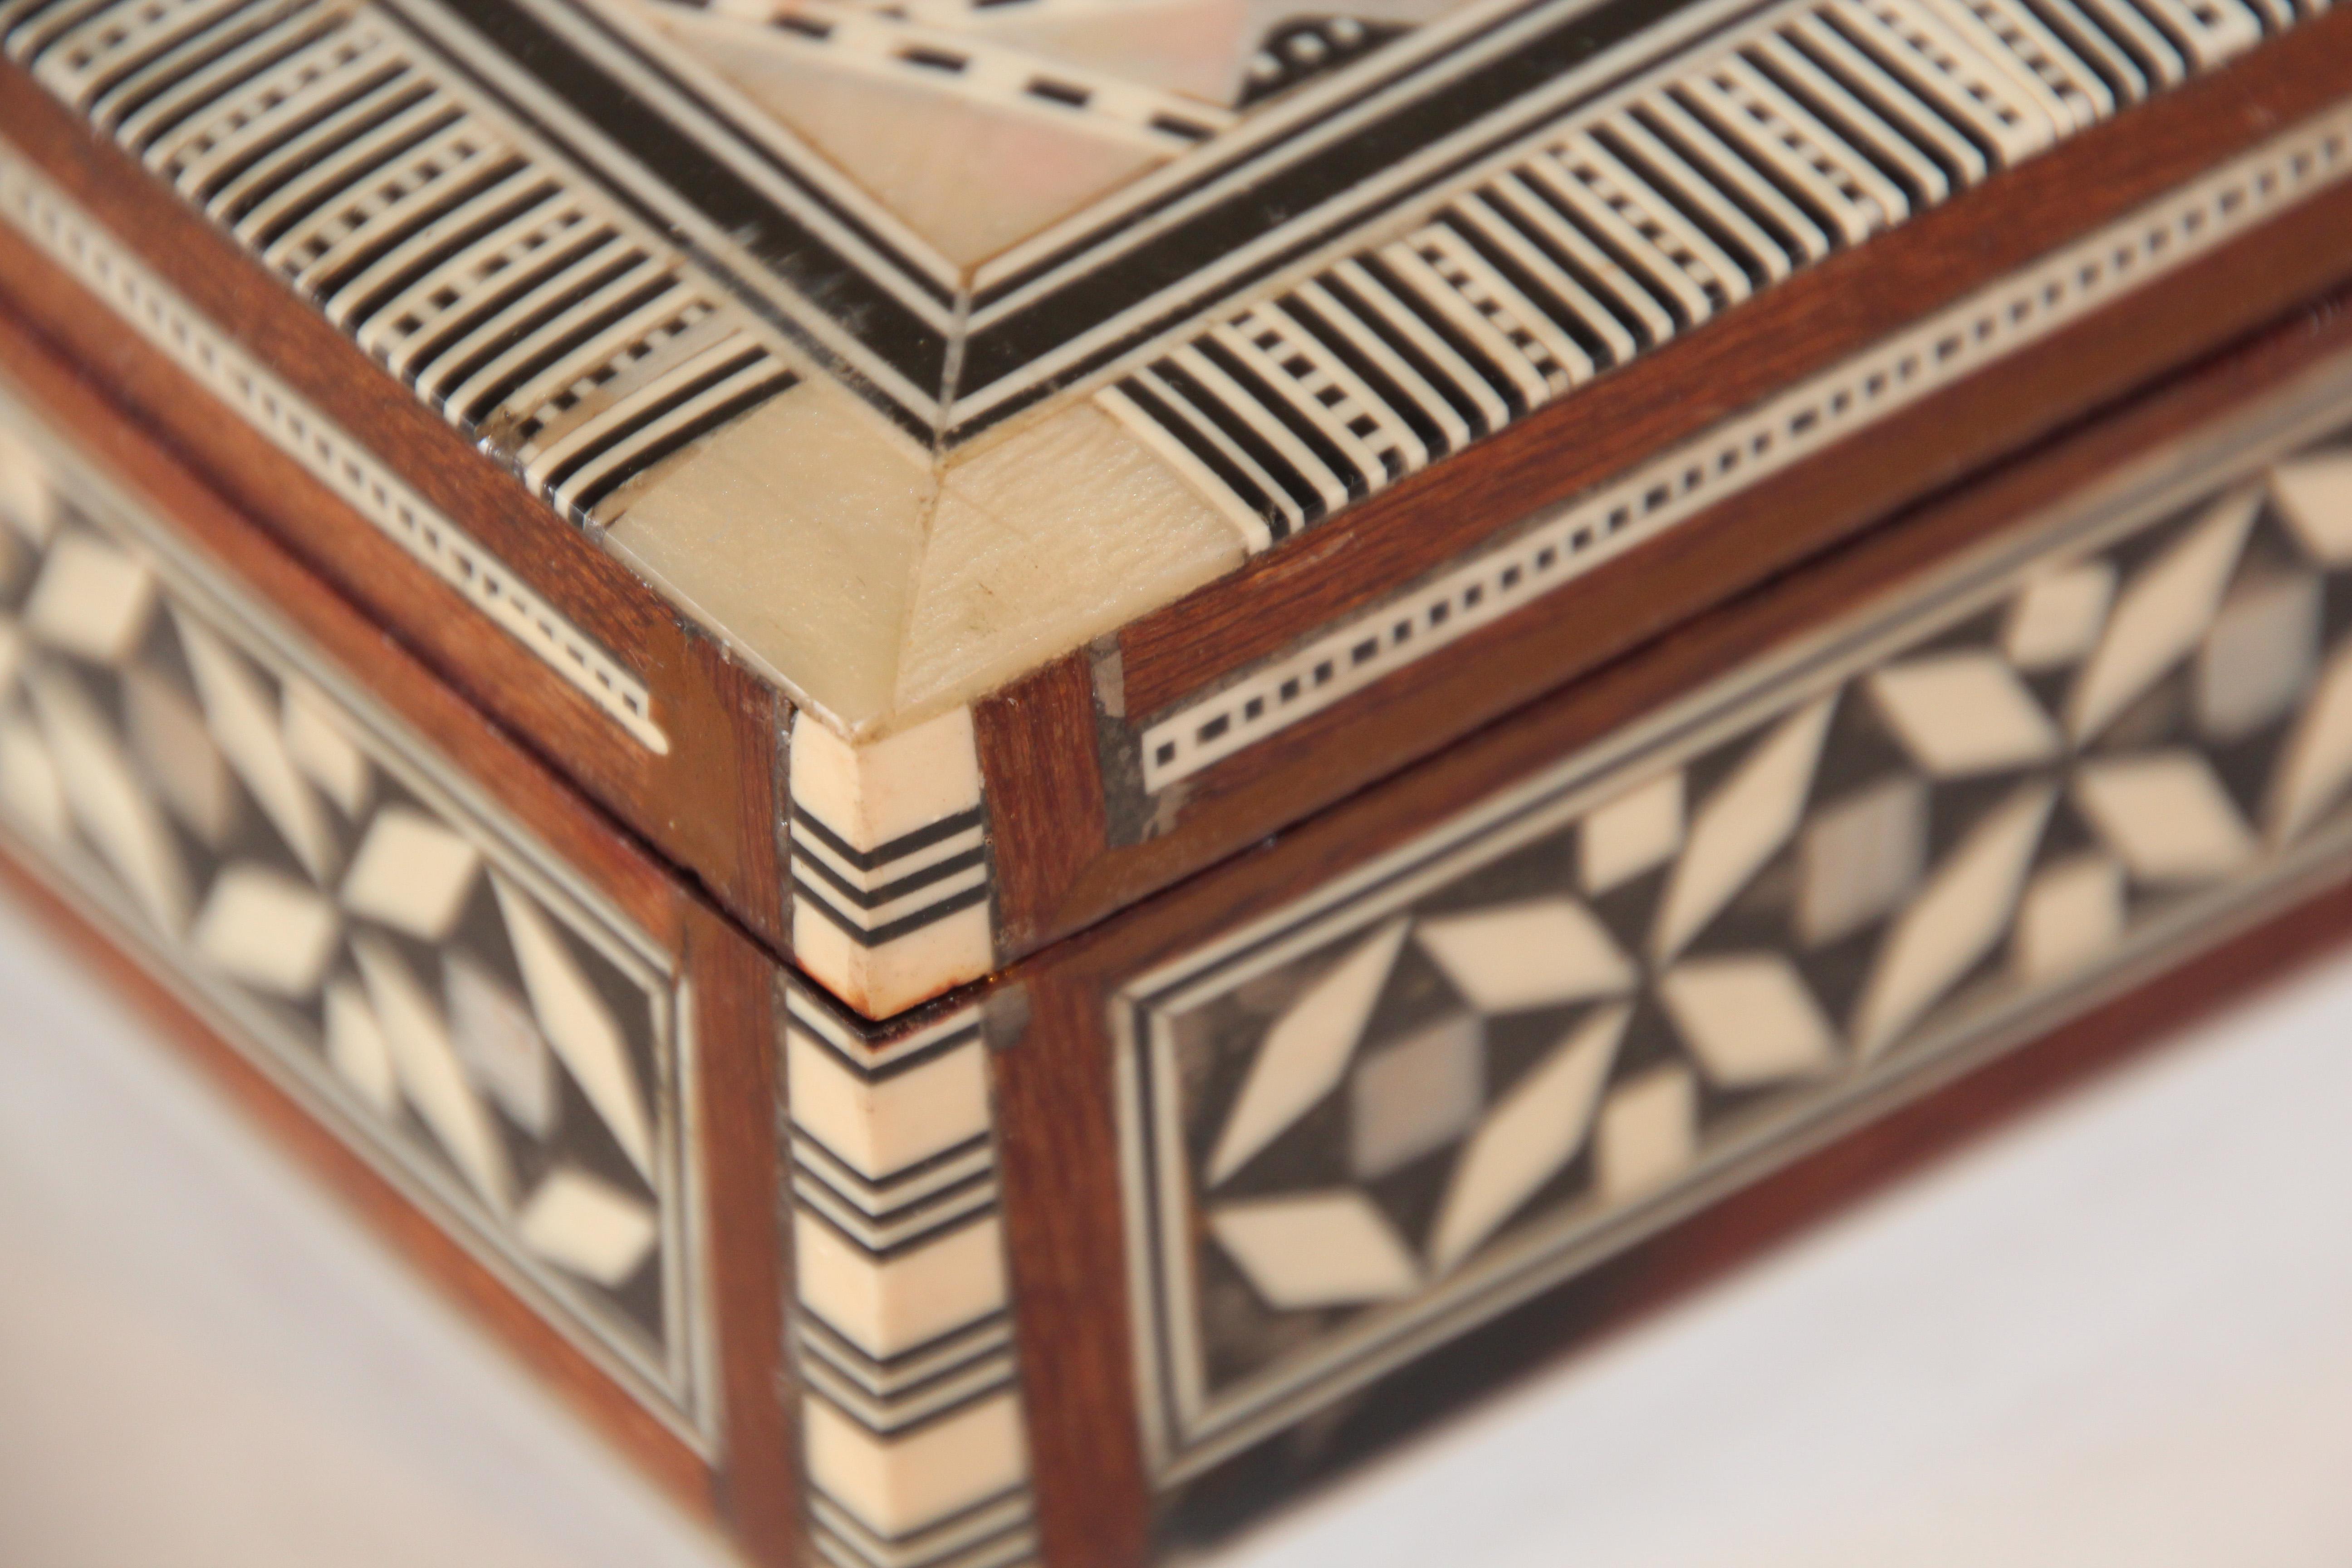 Inlay Middle Eastern Handcrafted Box Inlaid Marquetry